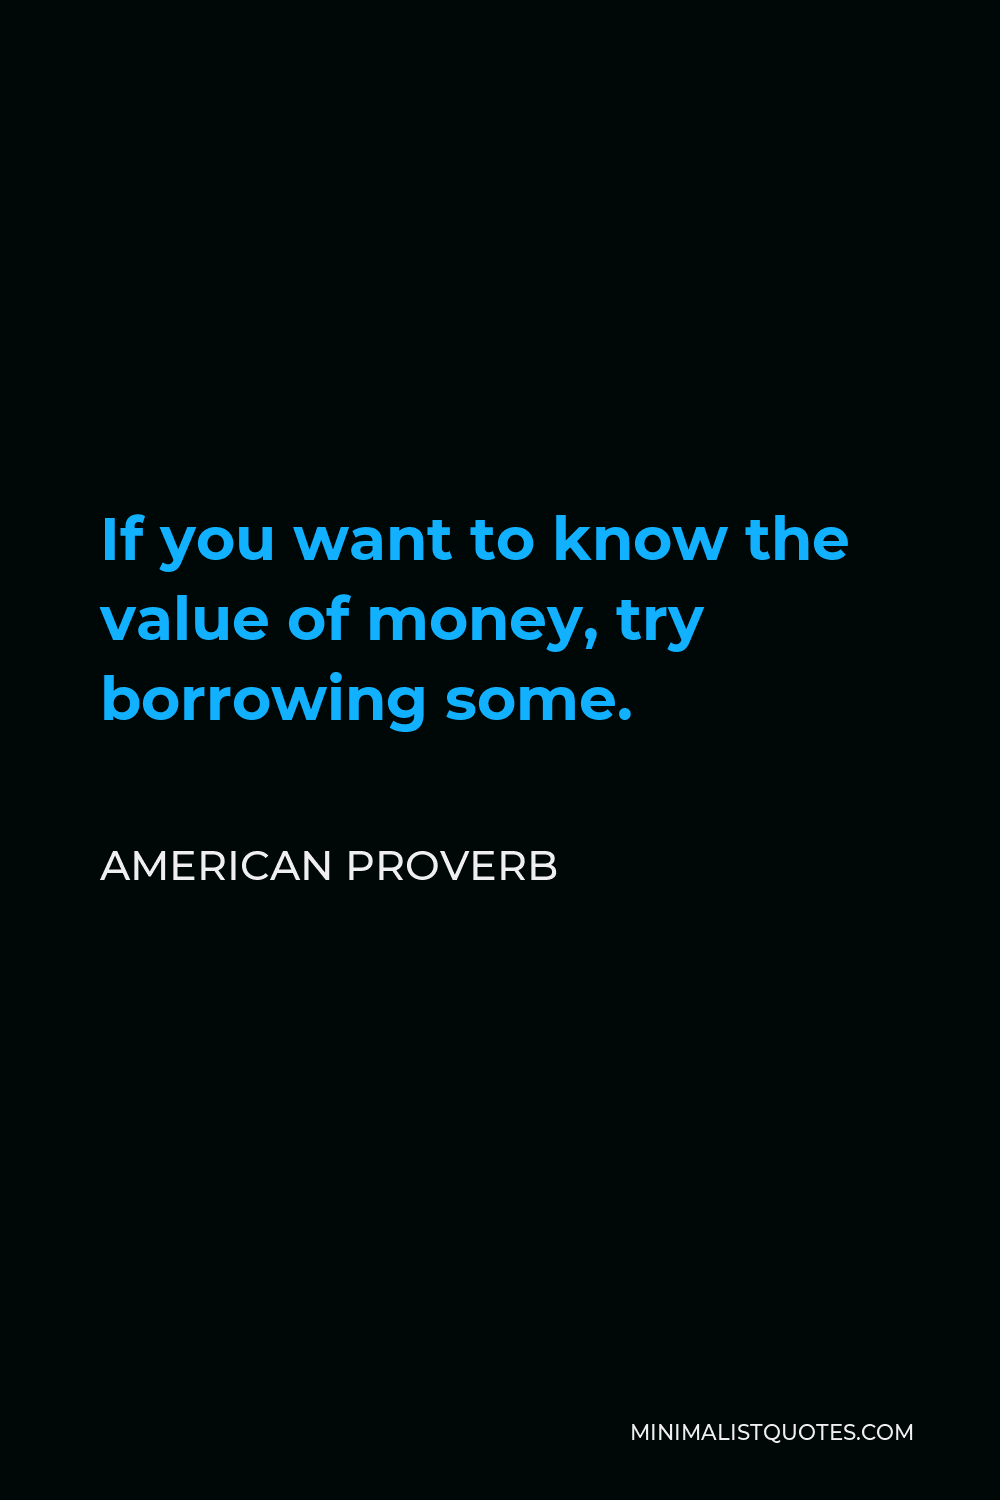 American Proverb Quote - If you want to know the value of money, try borrowing some.